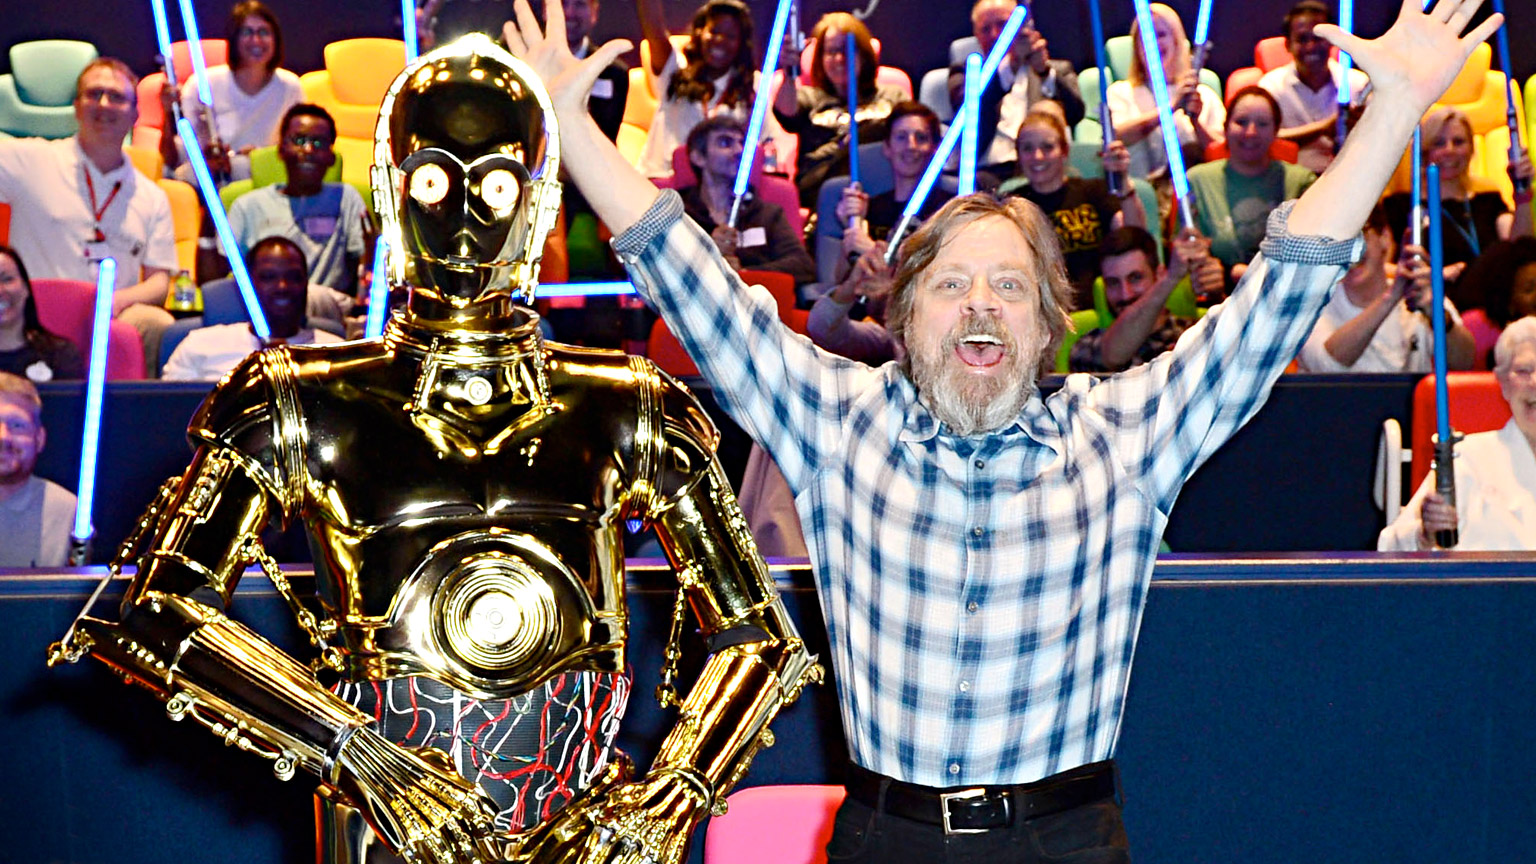 10 Things You Didn't Know About Star Wars Day - The Geek Twins